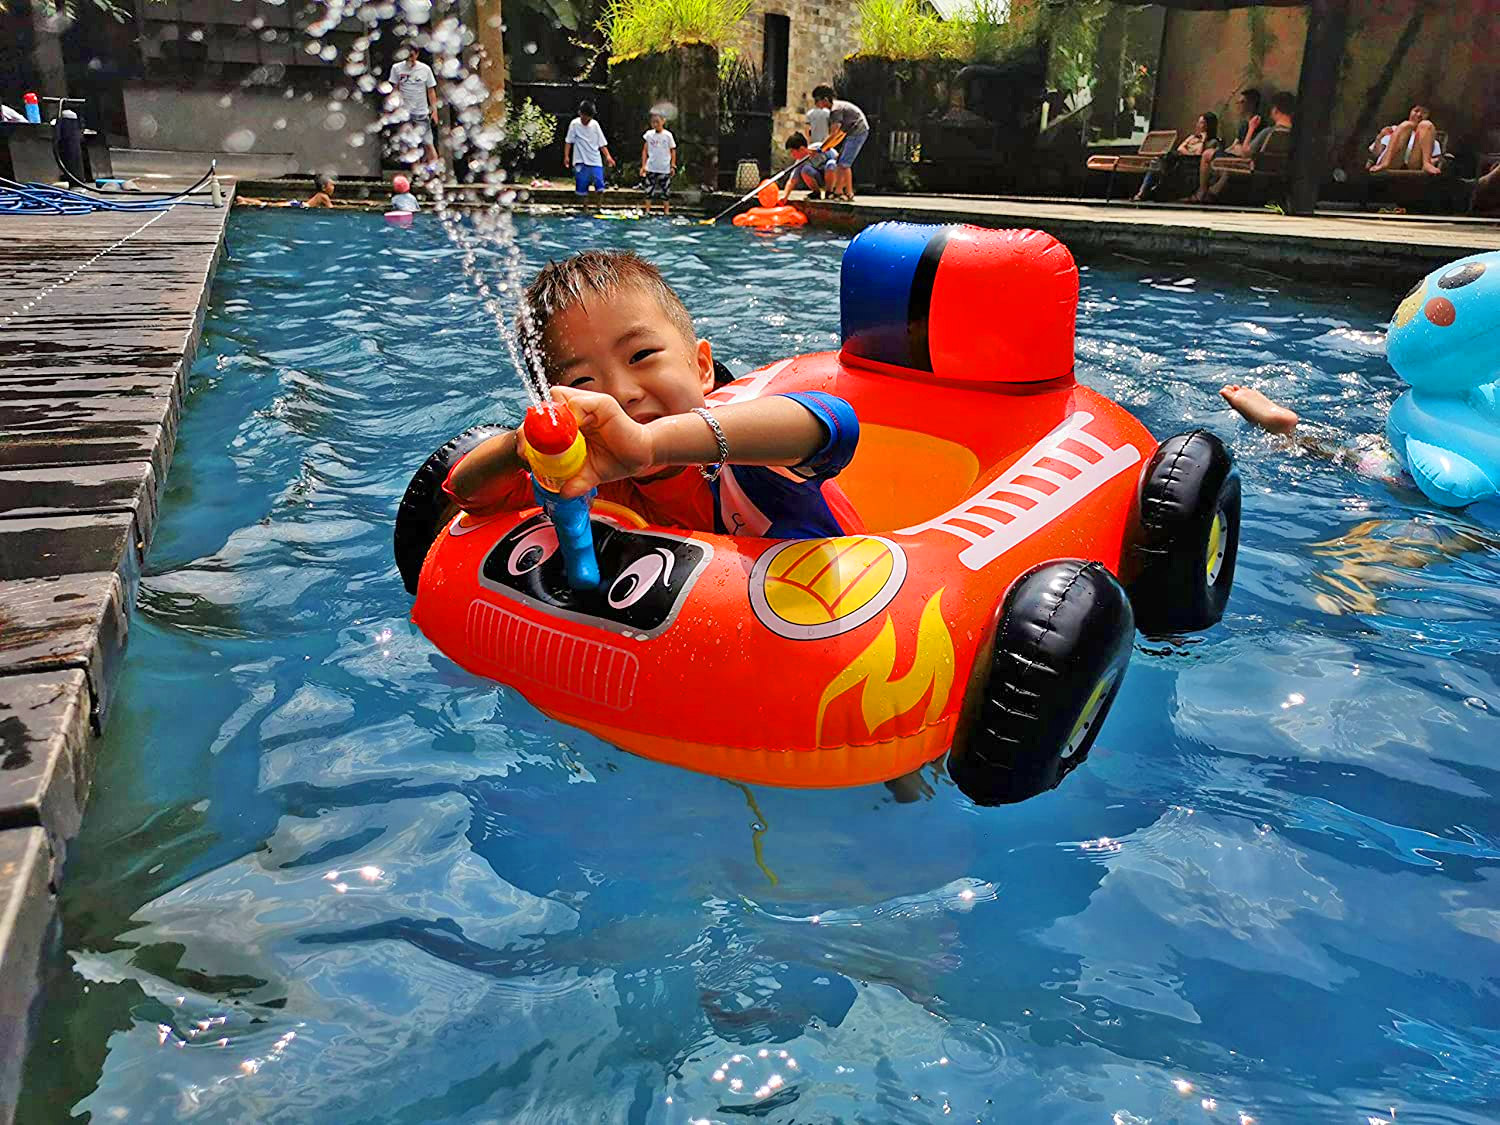 Inflatable pool float with integrated squirt guns - Pool toy with built-in water blaster